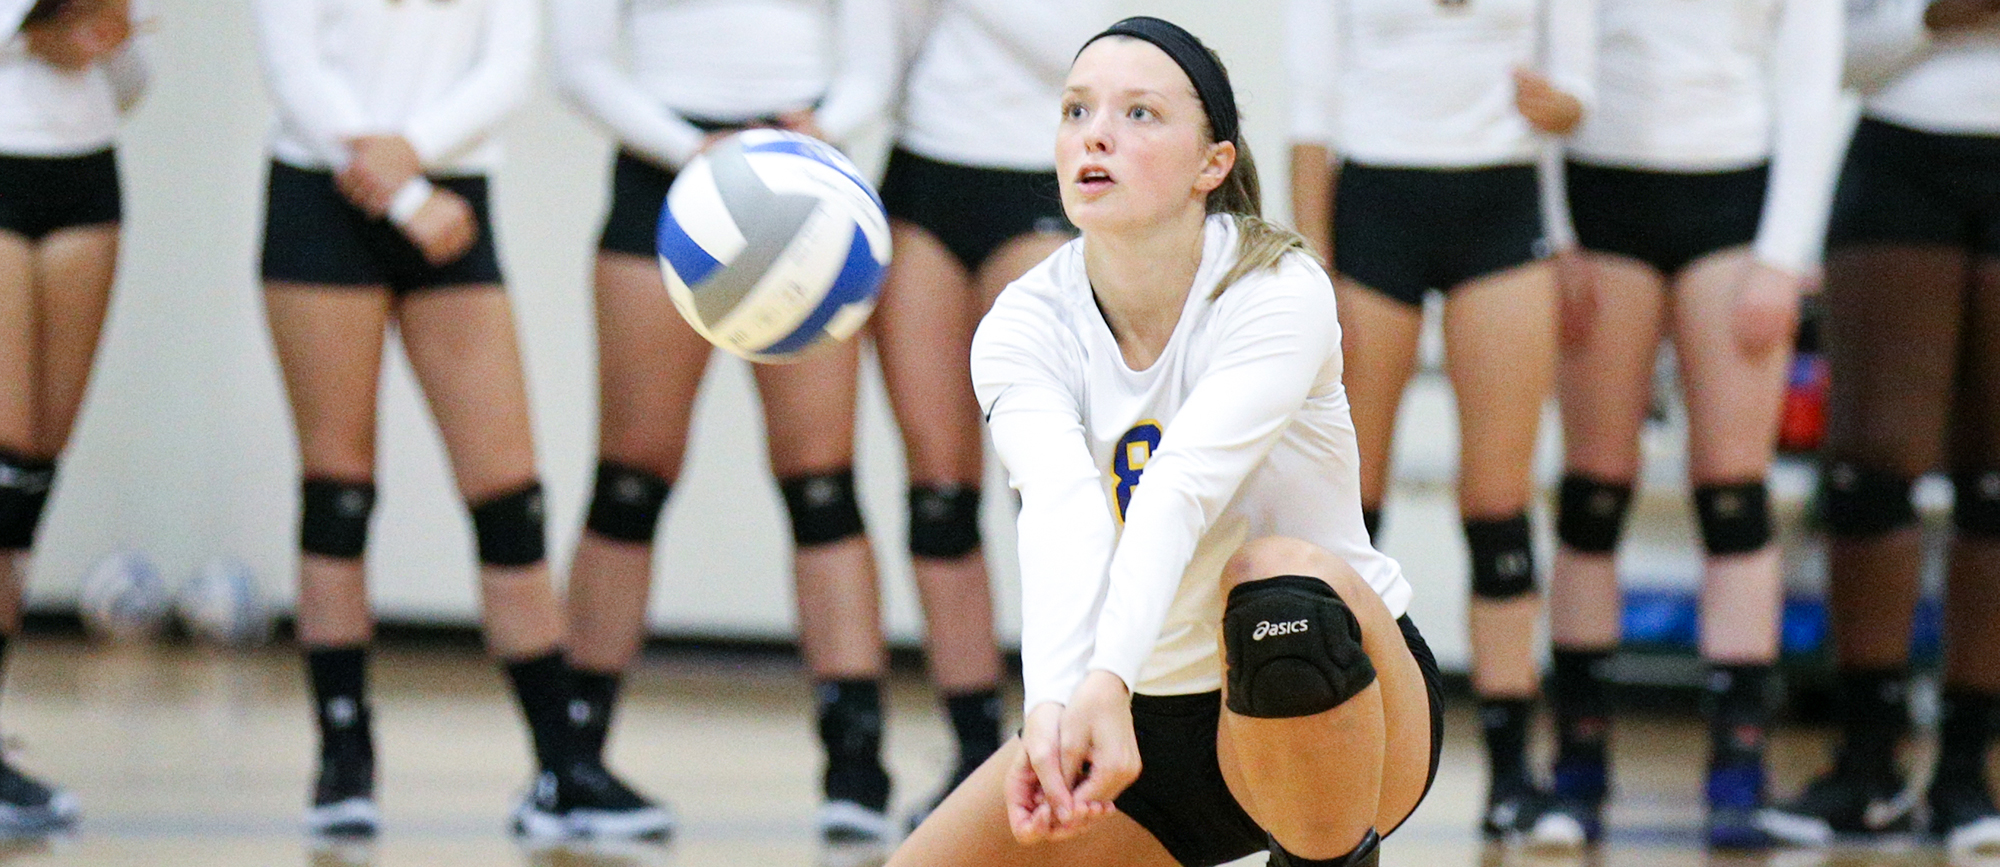 Junior Ashley Matthews recorded 15 kills in Western New England's 3-1 loss to Clark on Thursday. (Photo by Chris Marion)